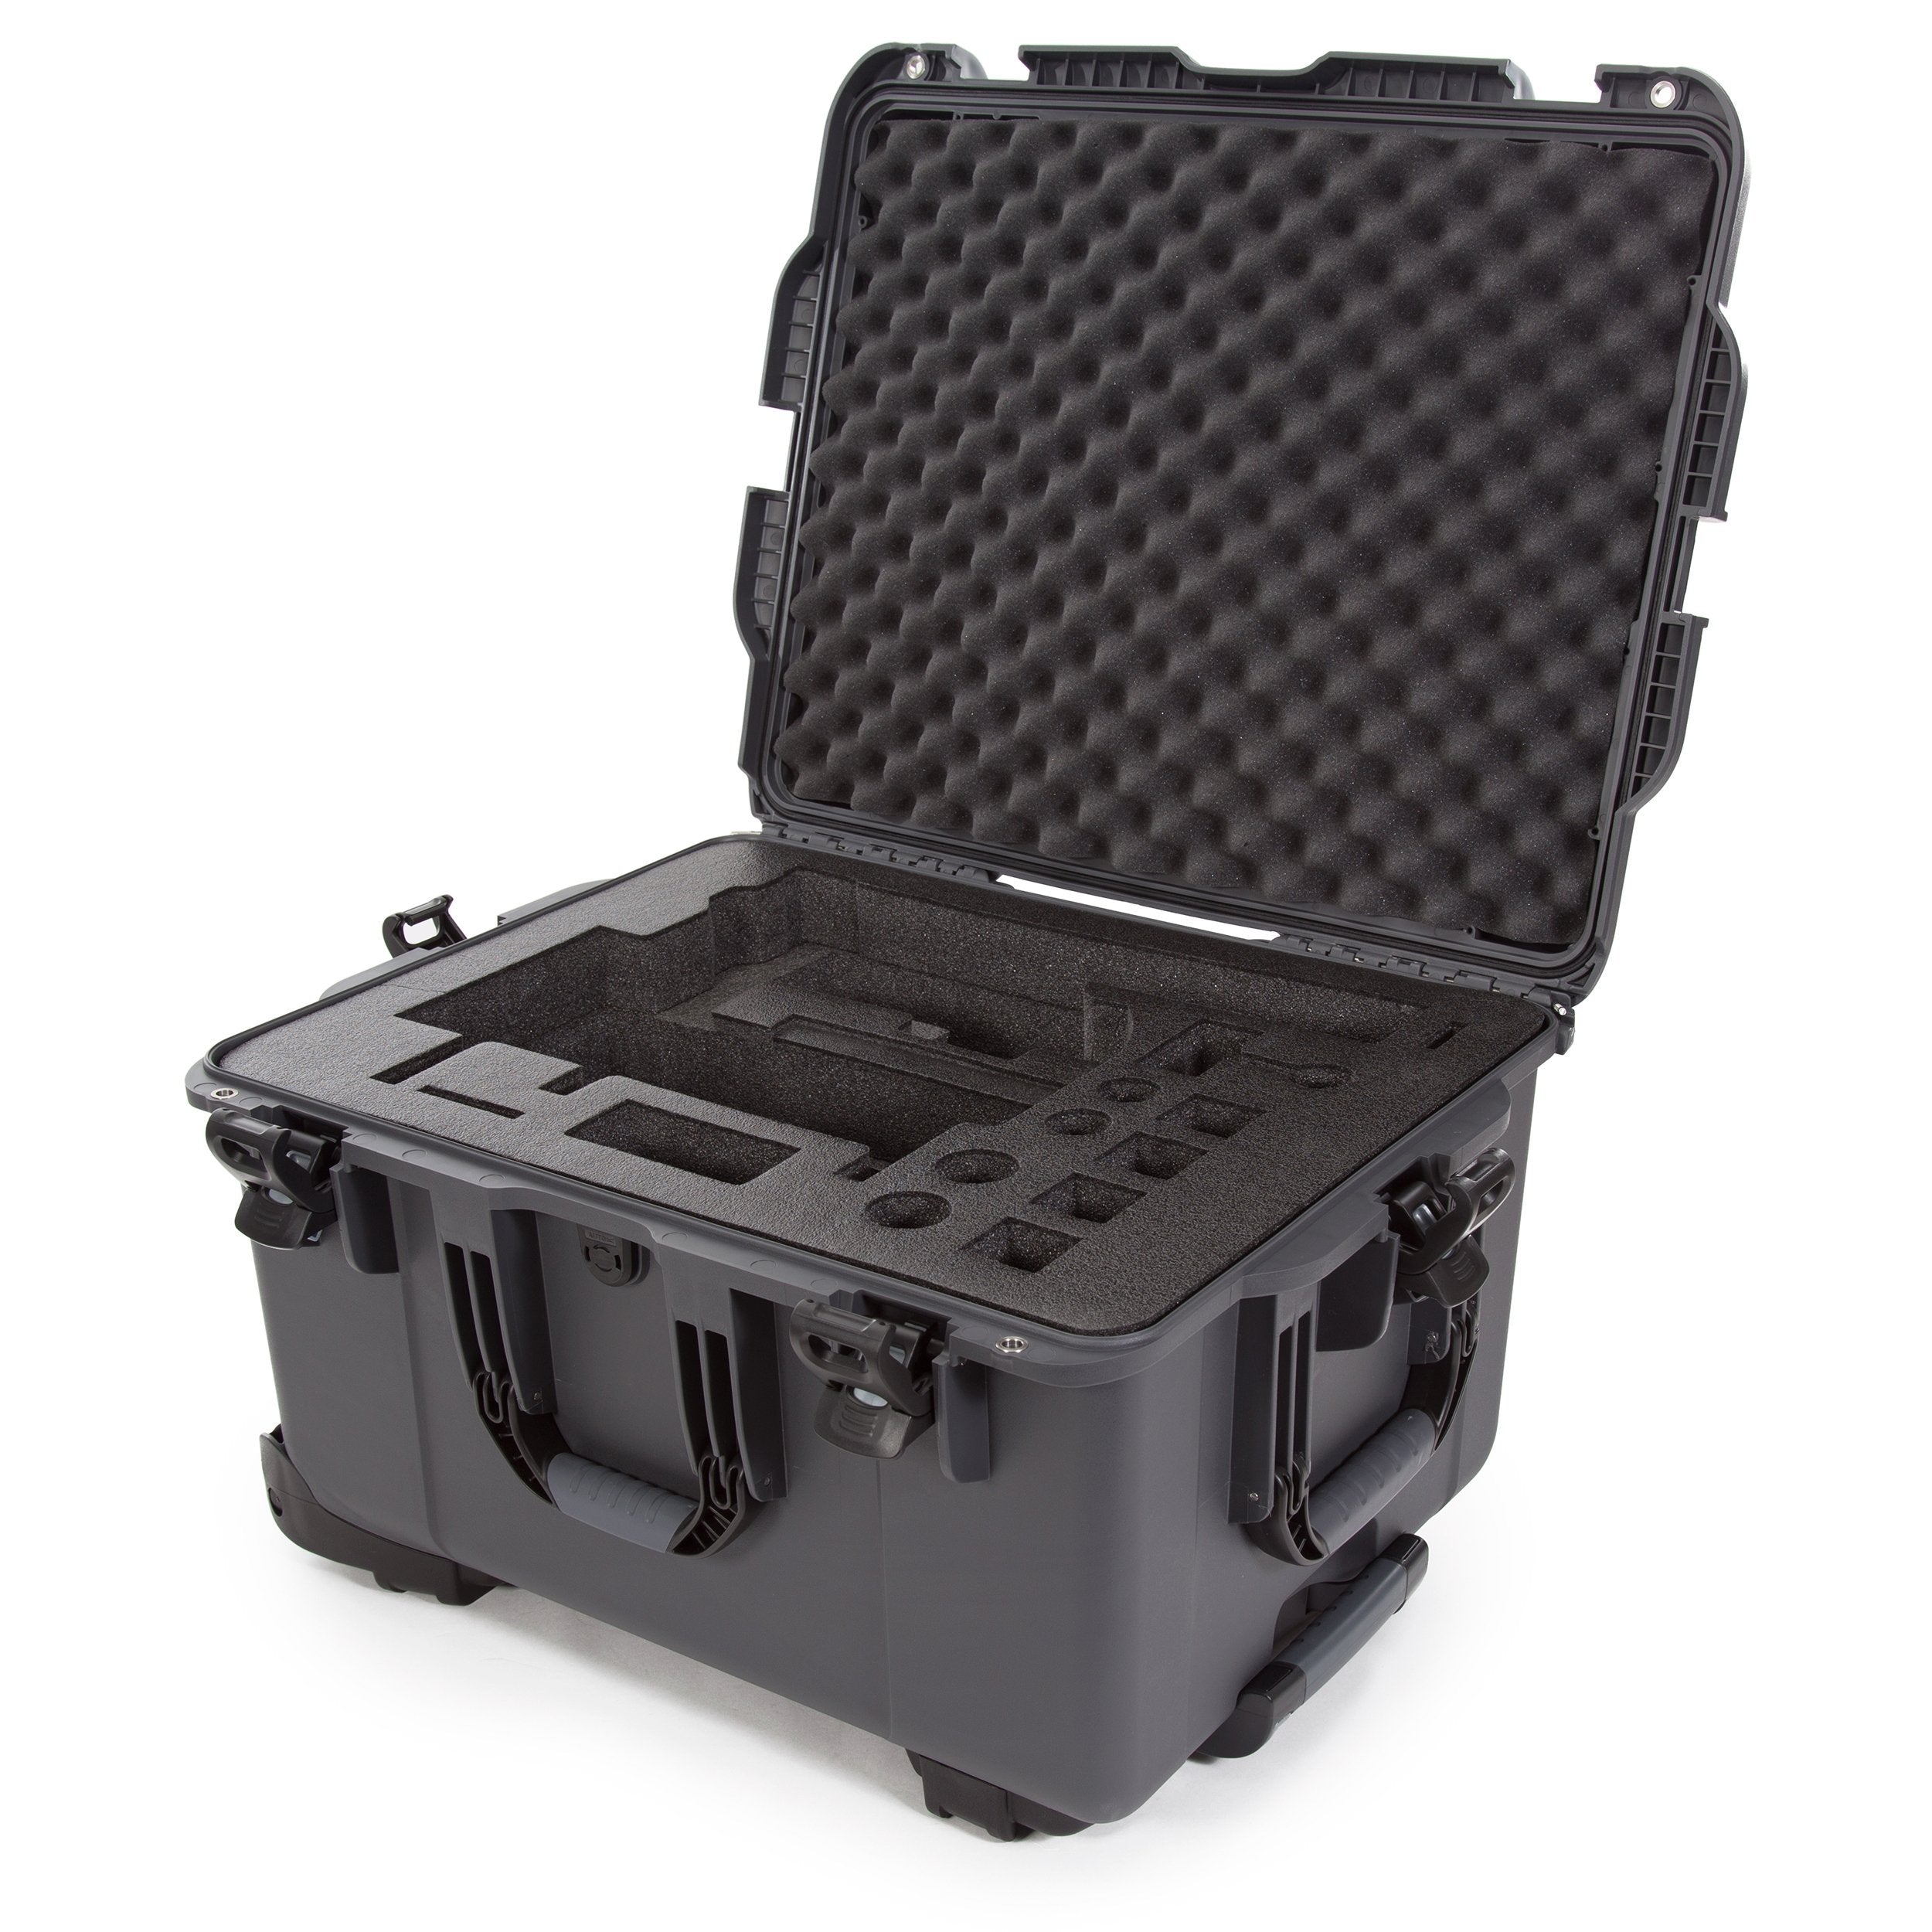 nanuk ronin m waterproof hard case with wheels and custom foam insert for dji ronin m gimbal stabilizer systems olive